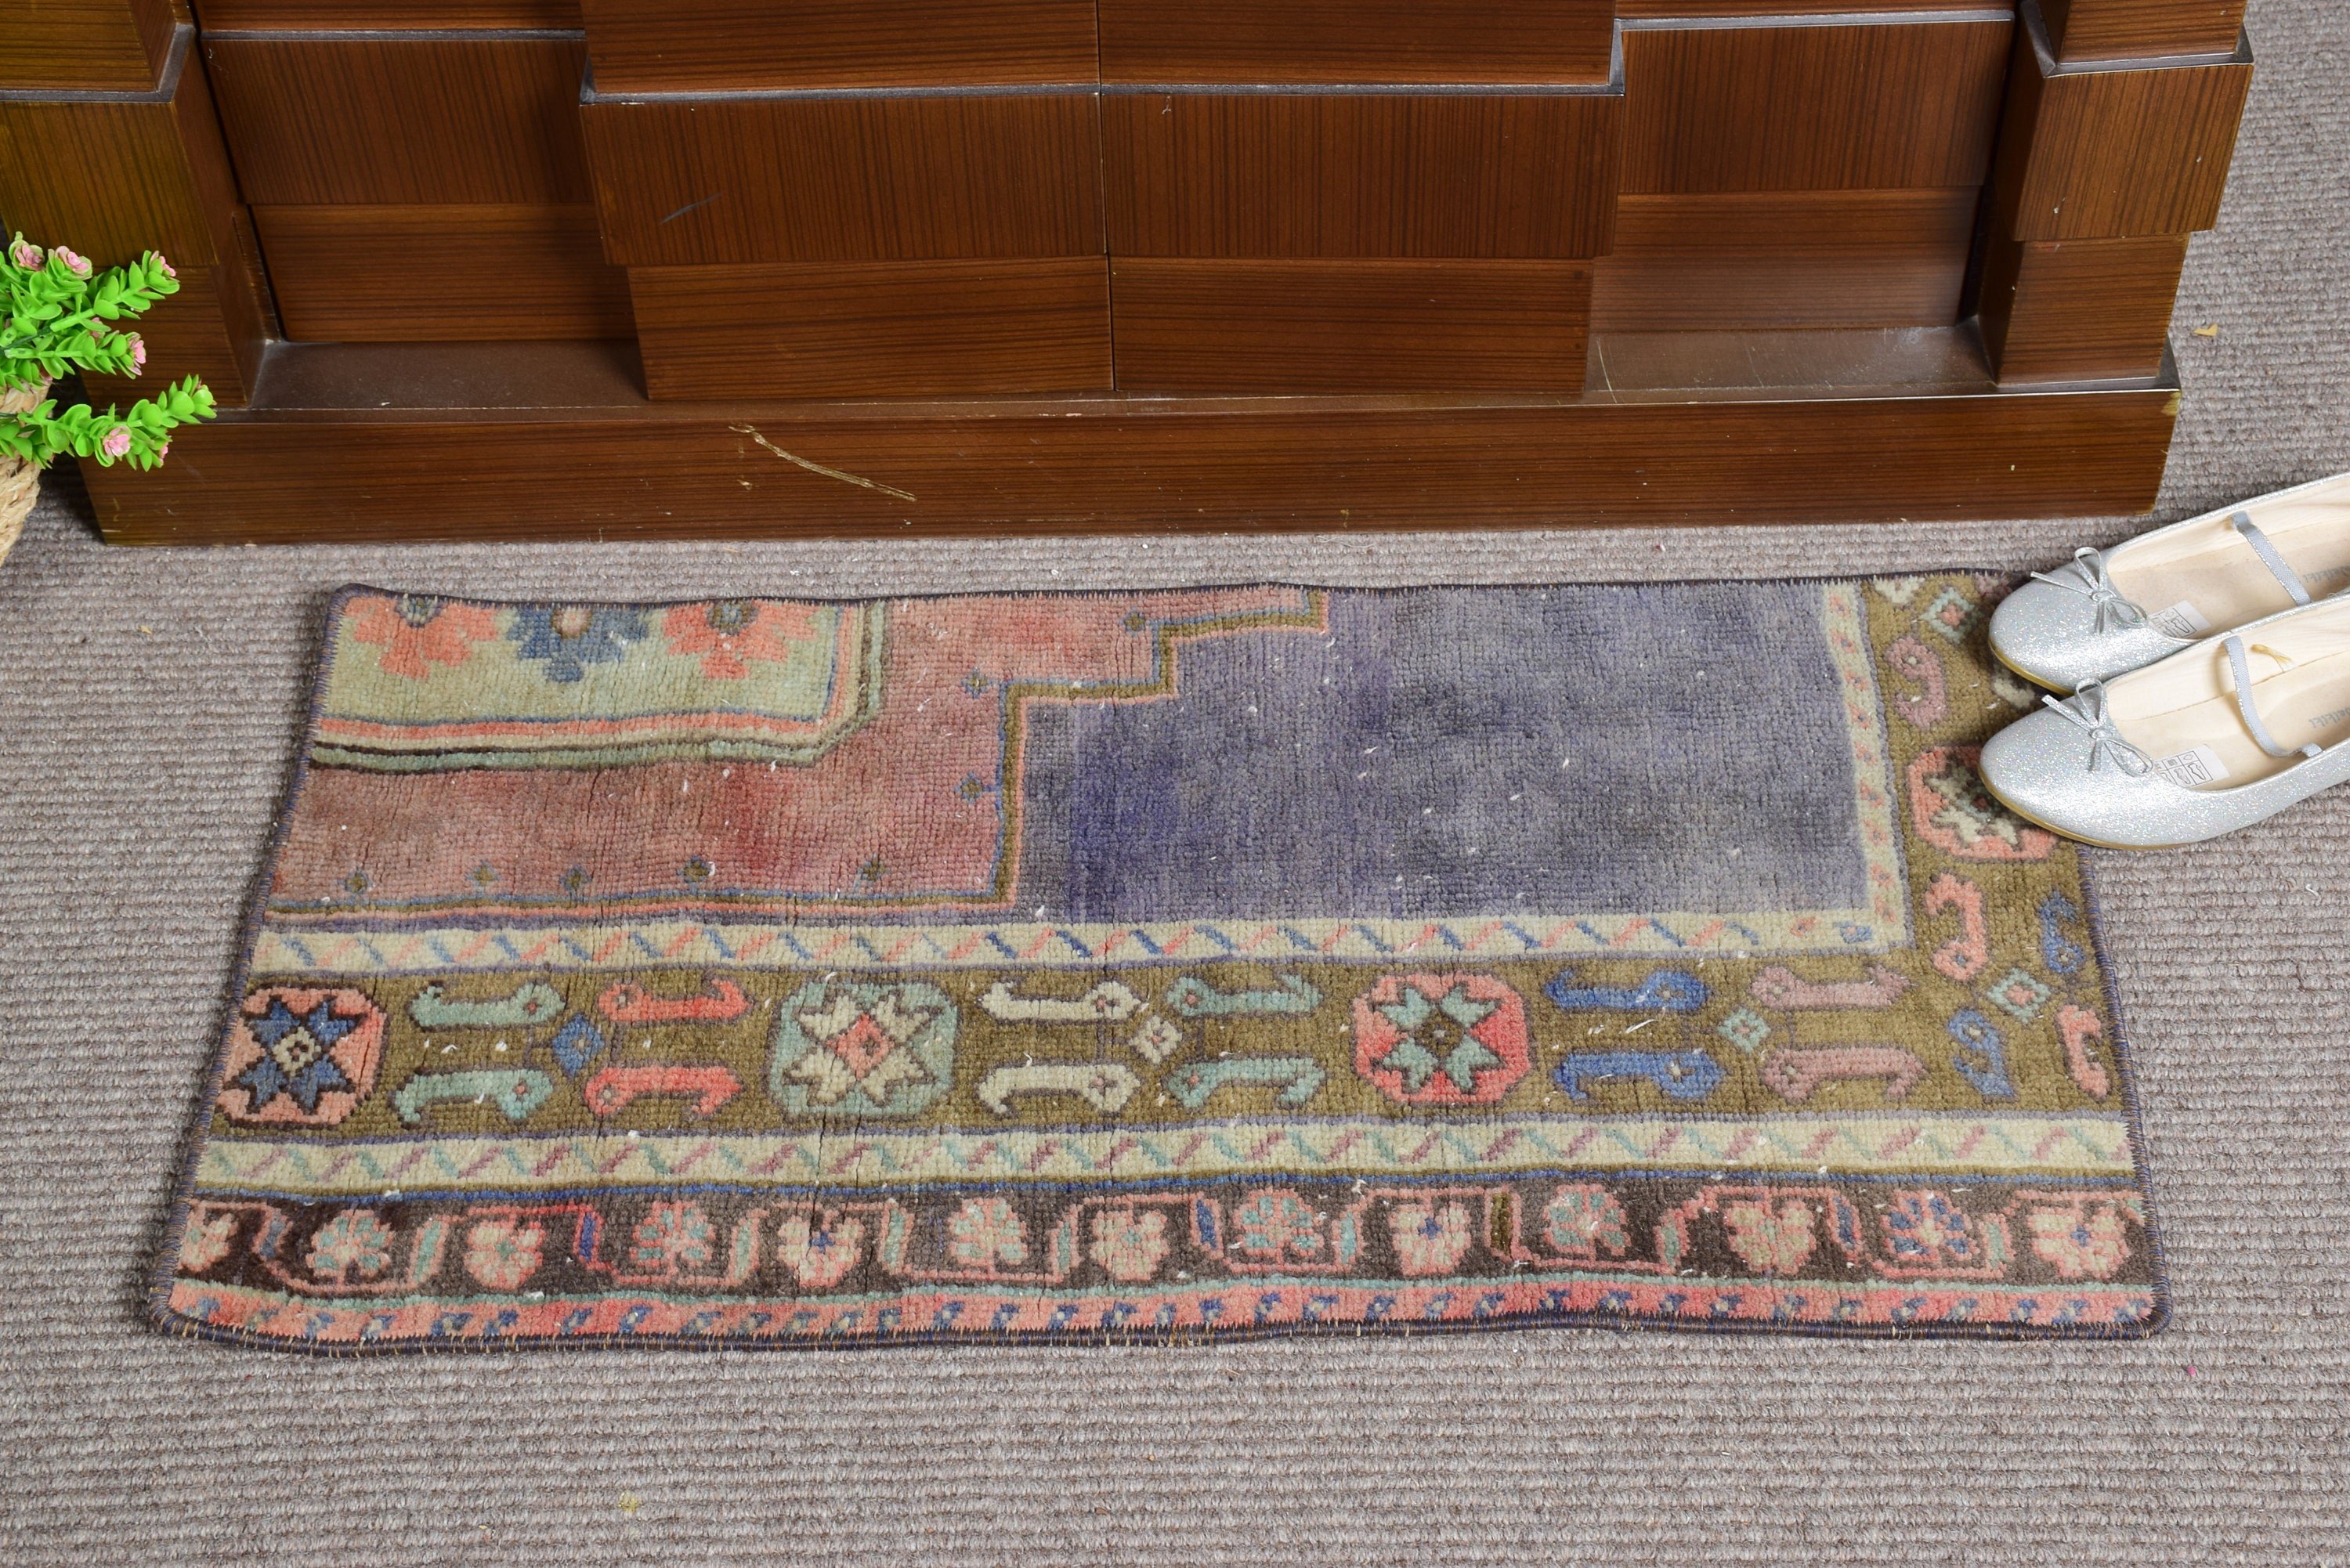 Kitchen Rugs, Vintage Rugs, Floor Rugs, Rugs for Entry, Turkish Rugs, Cool Rug, 1.4x2.7 ft Small Rug, Car Mat Rug, Purple Cool Rugs